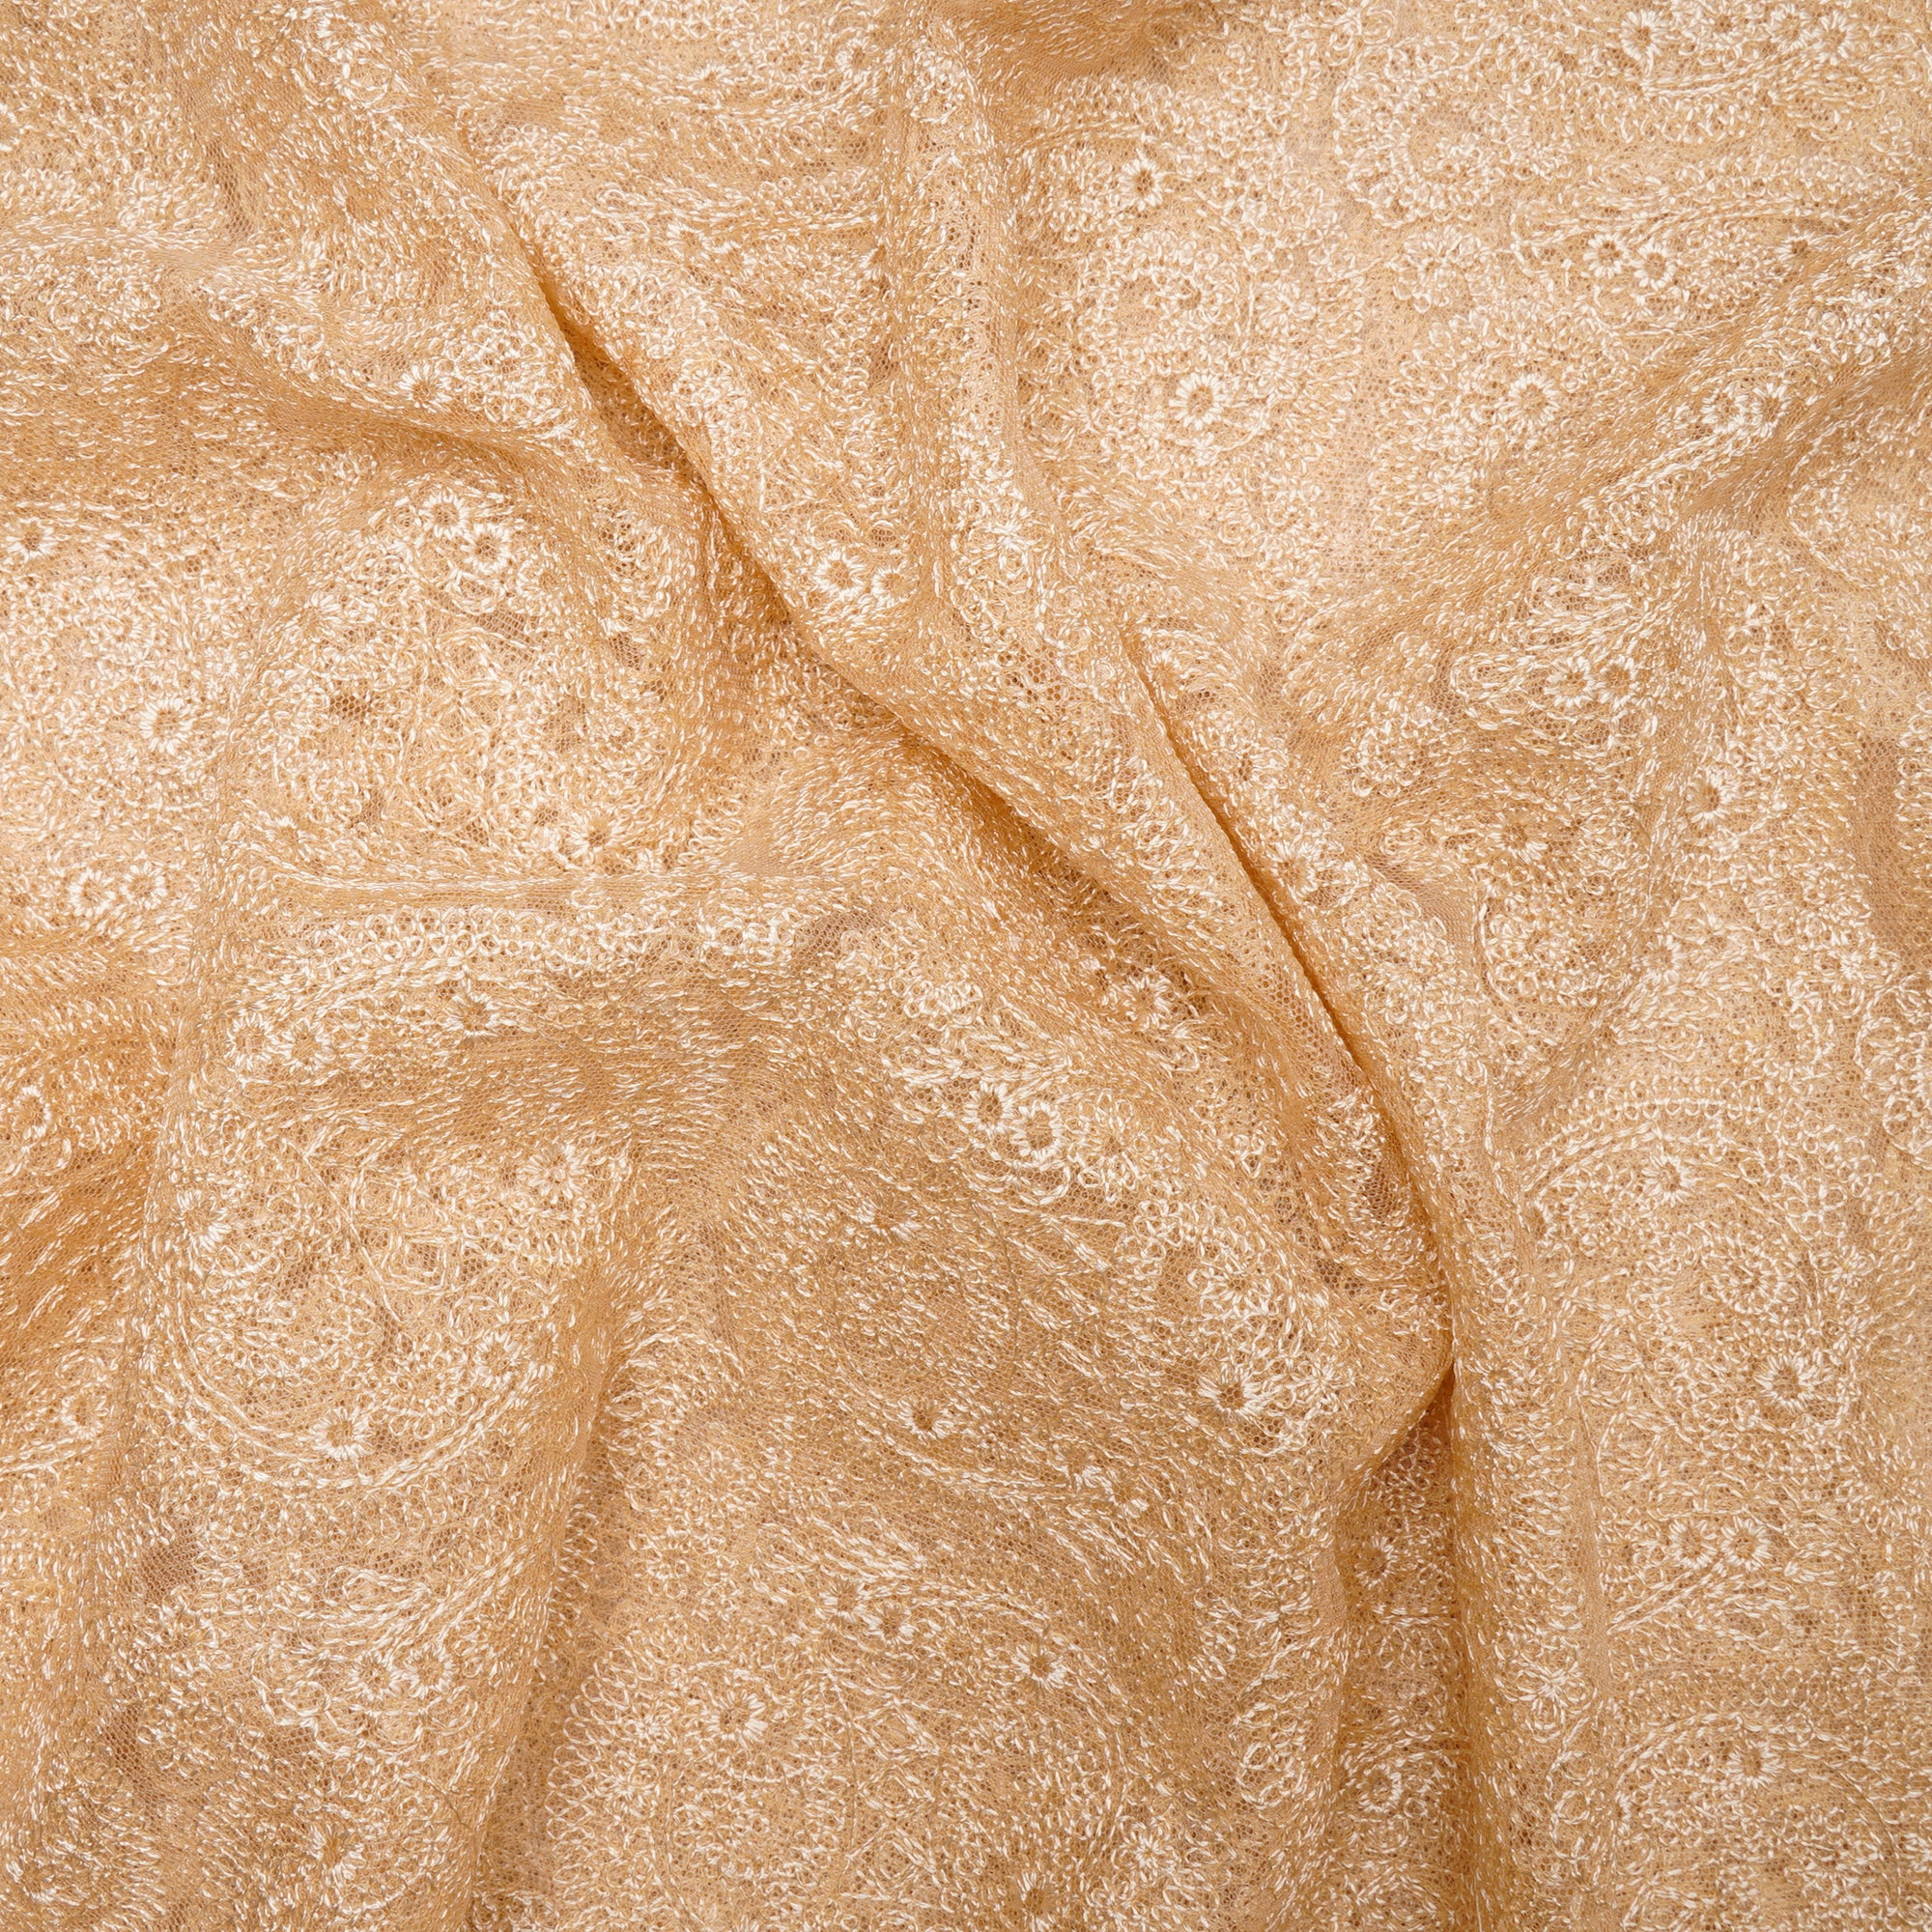 Beige Color Embroidered Nylon Net Fabric